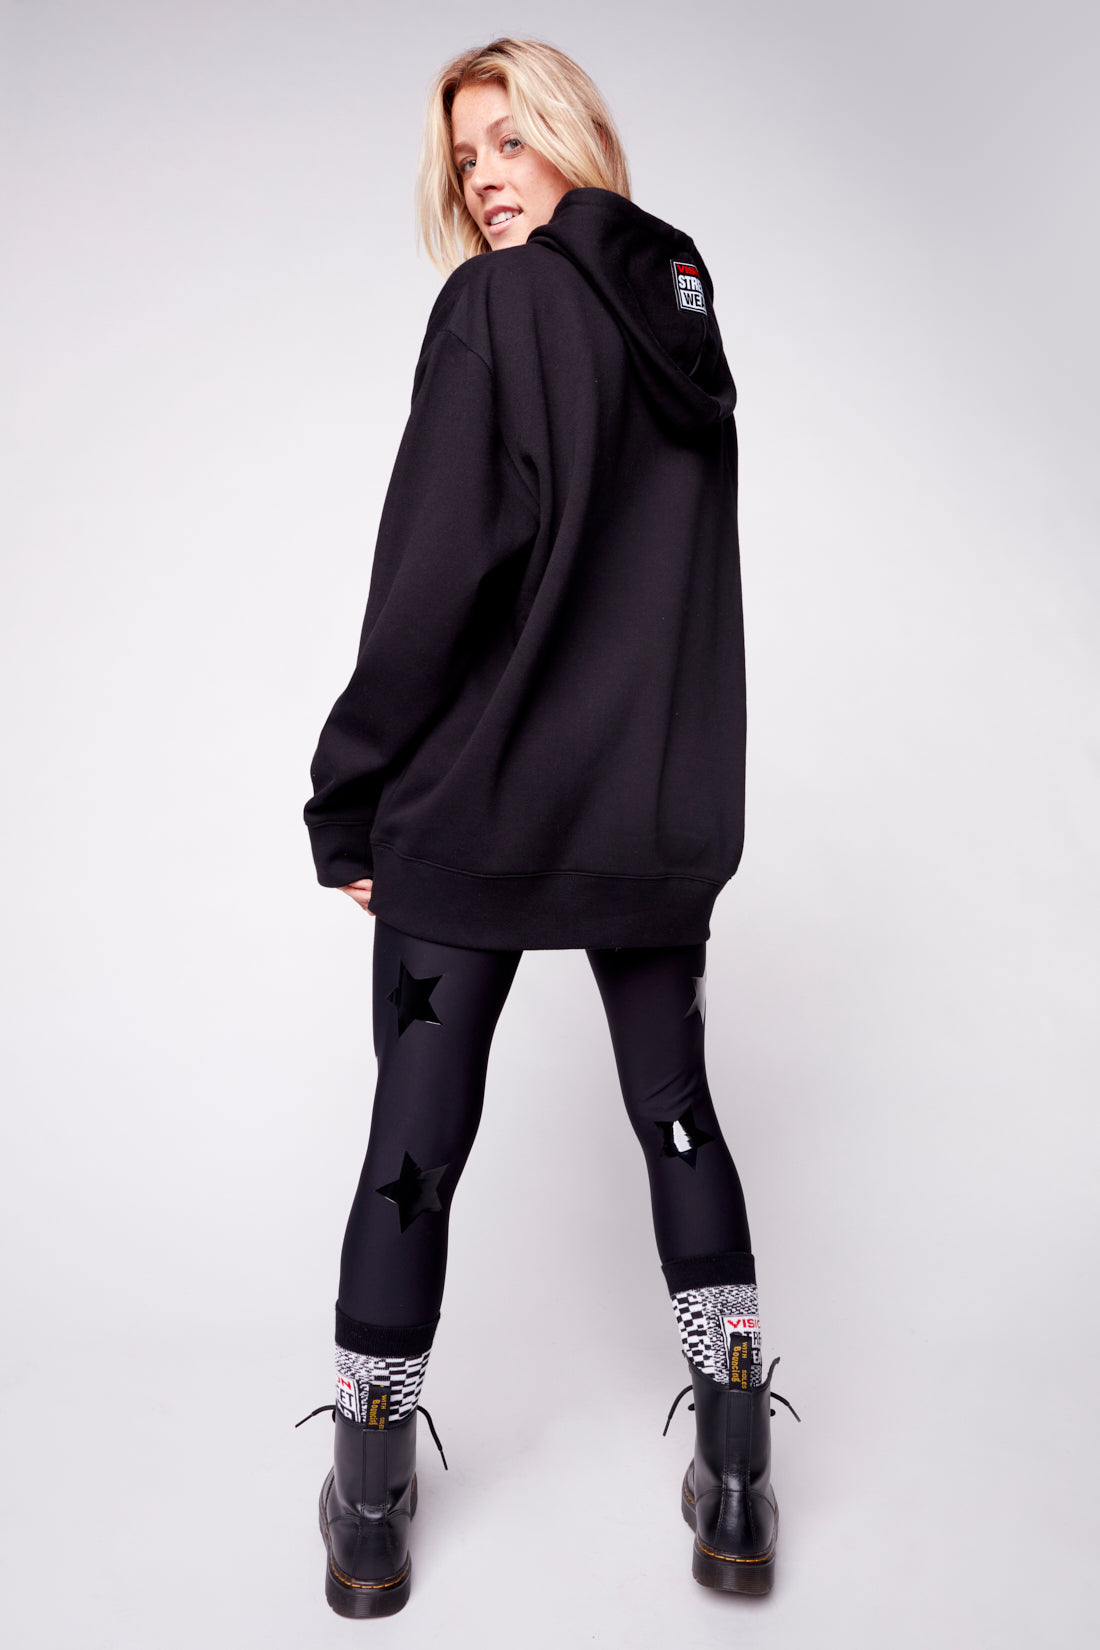 Vision Street Wear Front Embroided Logo Hoodie Black